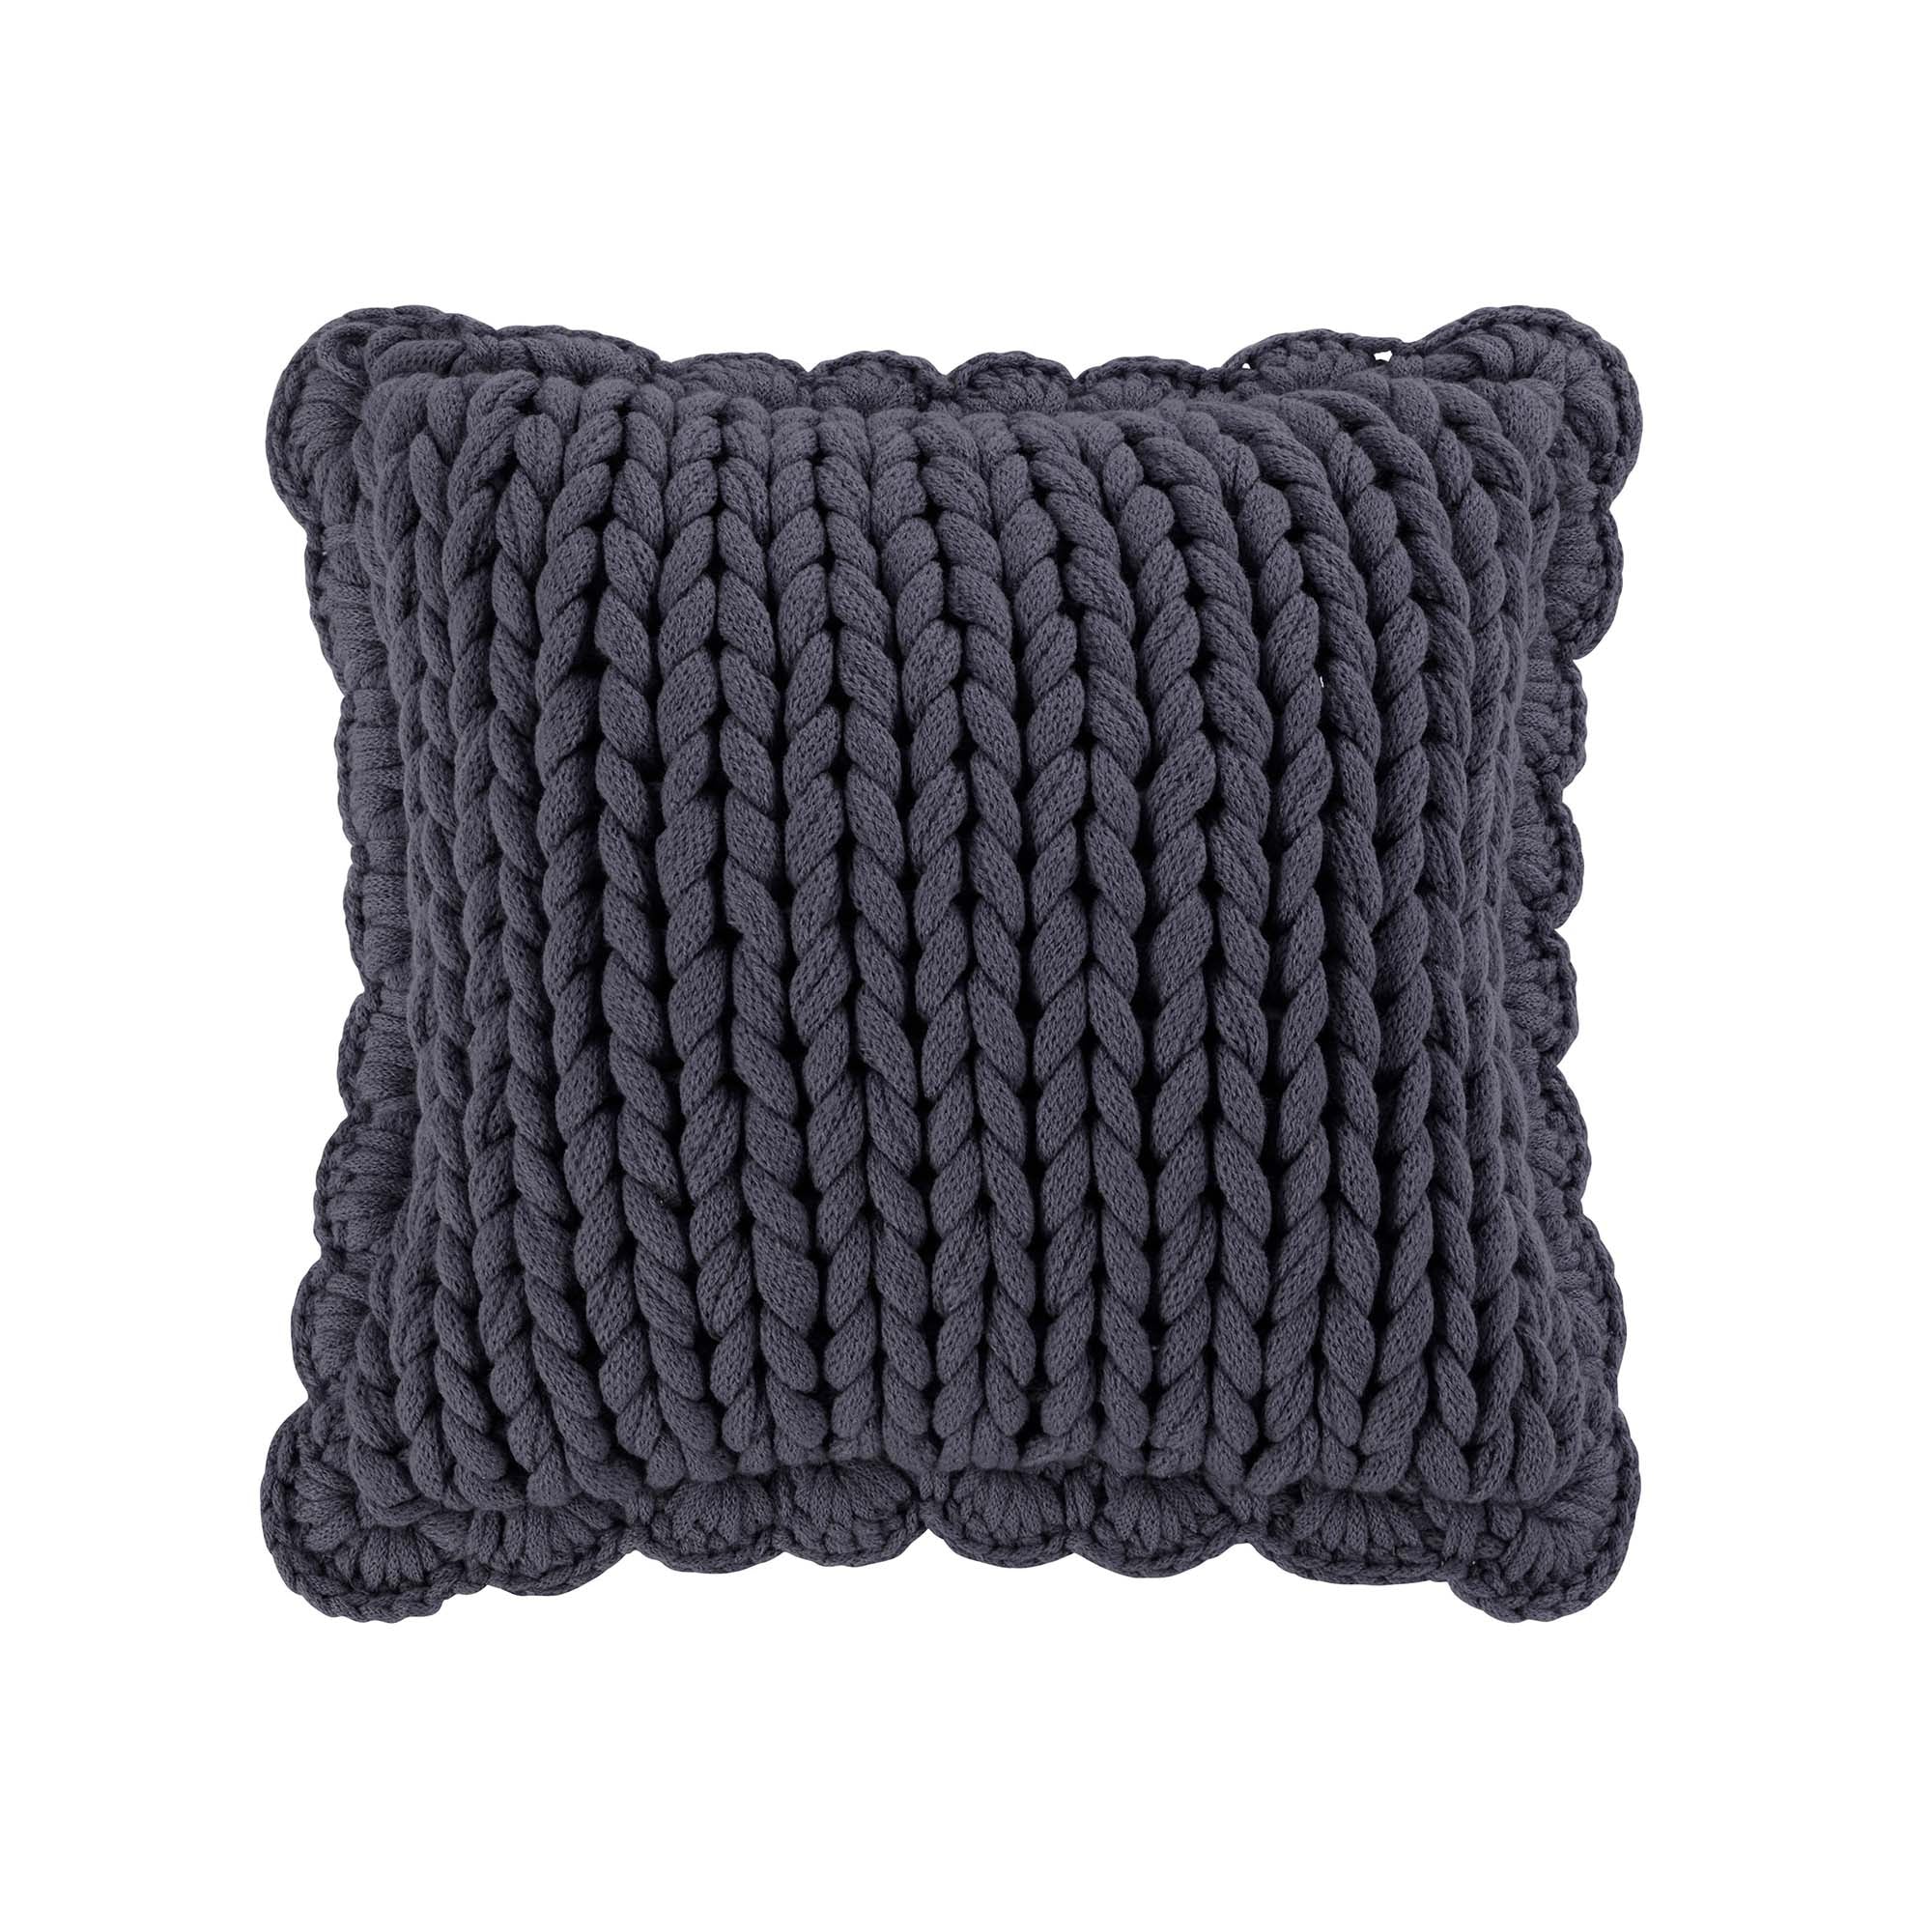 Chunky Knitted Indigo Decorative Pillow Throw Pillows By Donna Sharp